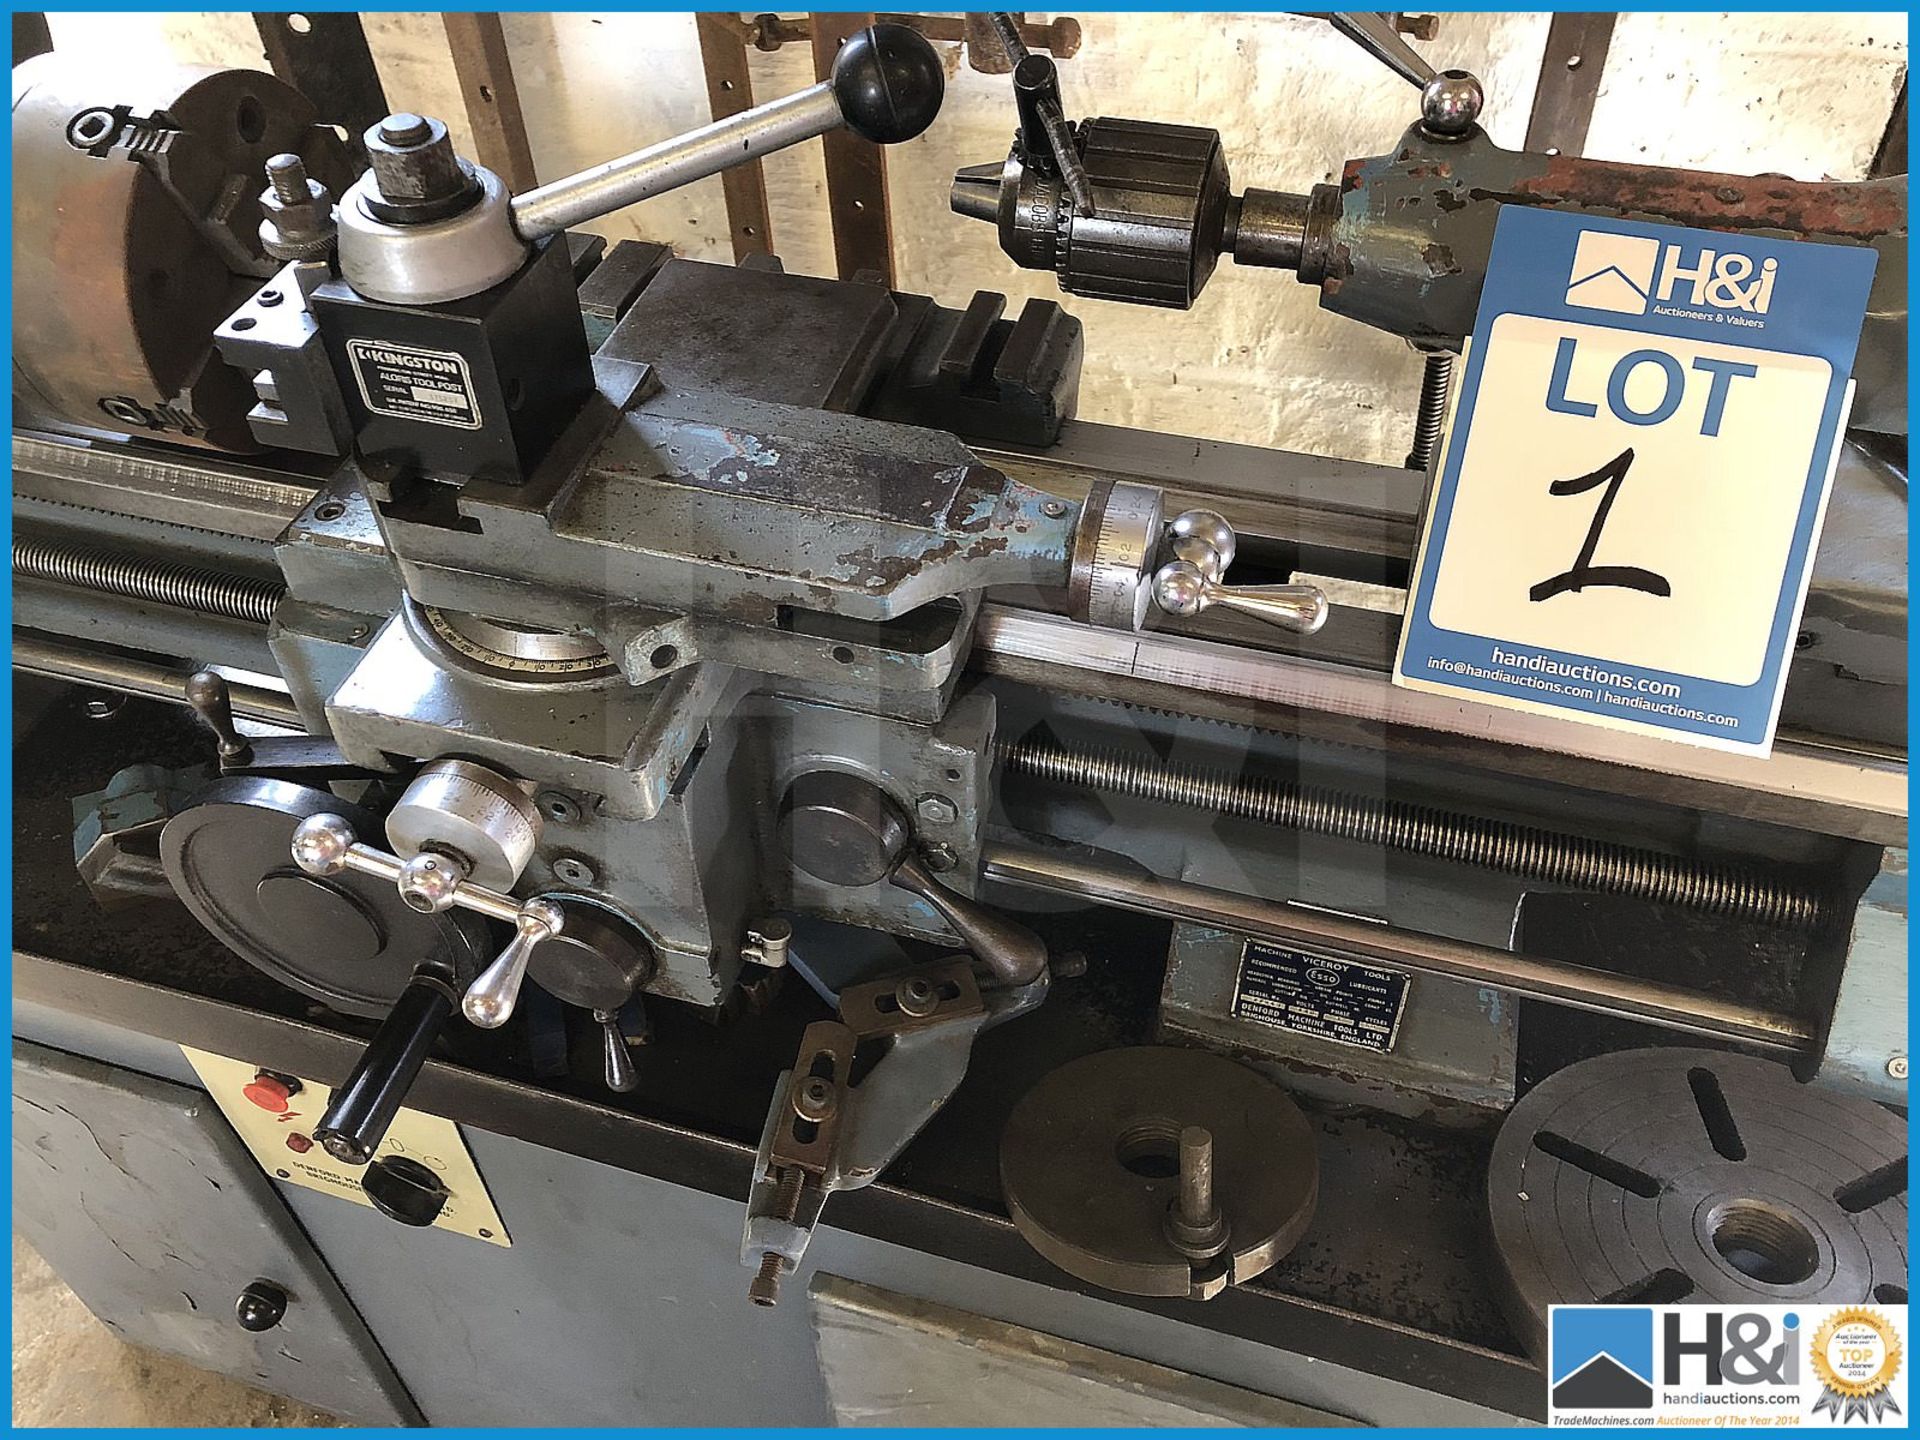 Viceroy Metric TD5 1/1G/B metalworking lathe with 2 x chucks in excellent order. 3 phase - Bild 3 aus 8